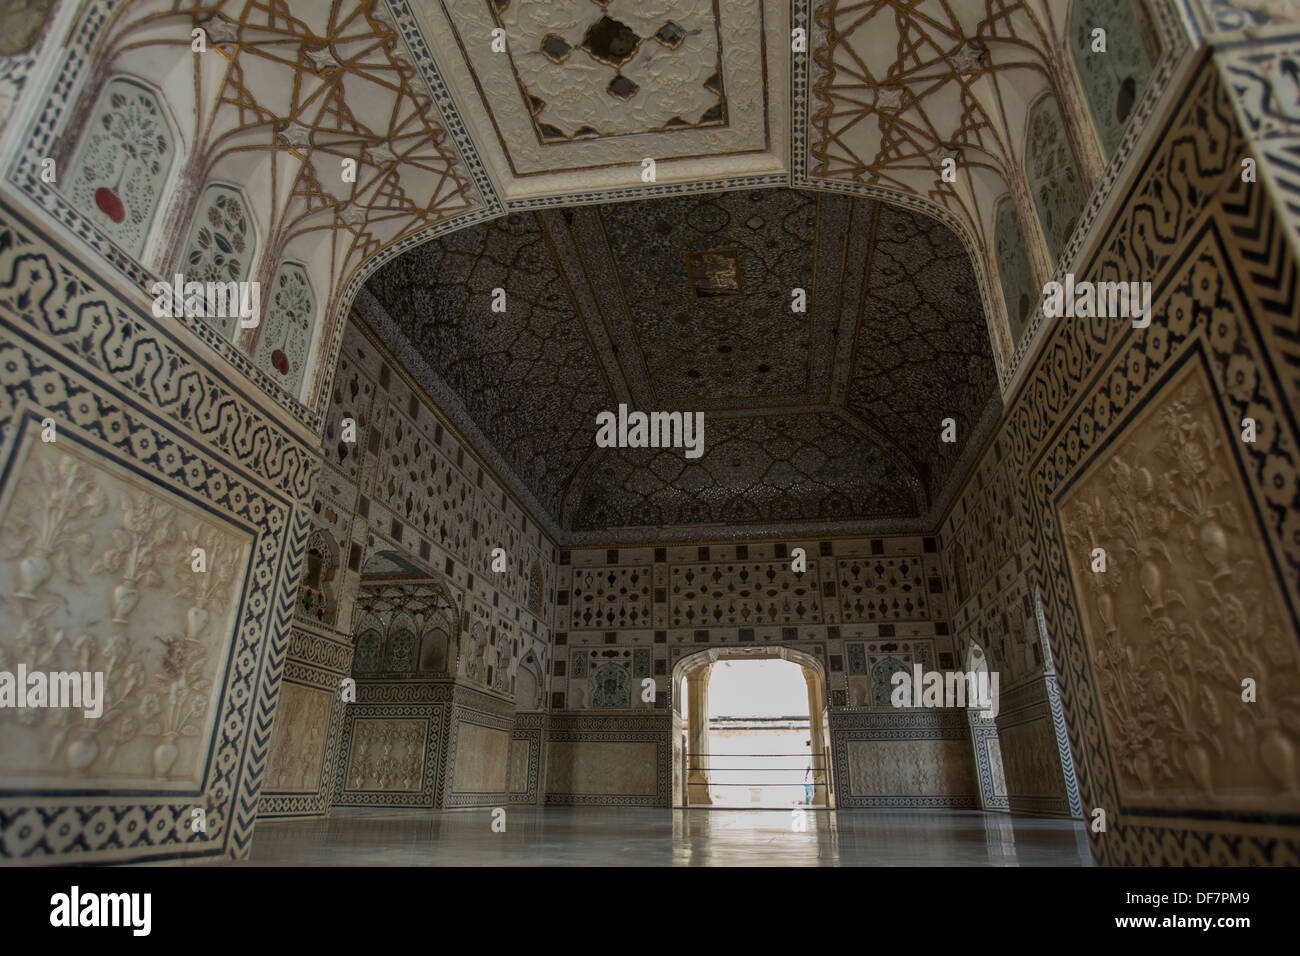 Sheesh Mahal - Mirrored Palace at Amer Fort (often spelled Amber Fort) was built by Raja Man Singh I and is renowned for its art Stock Photo